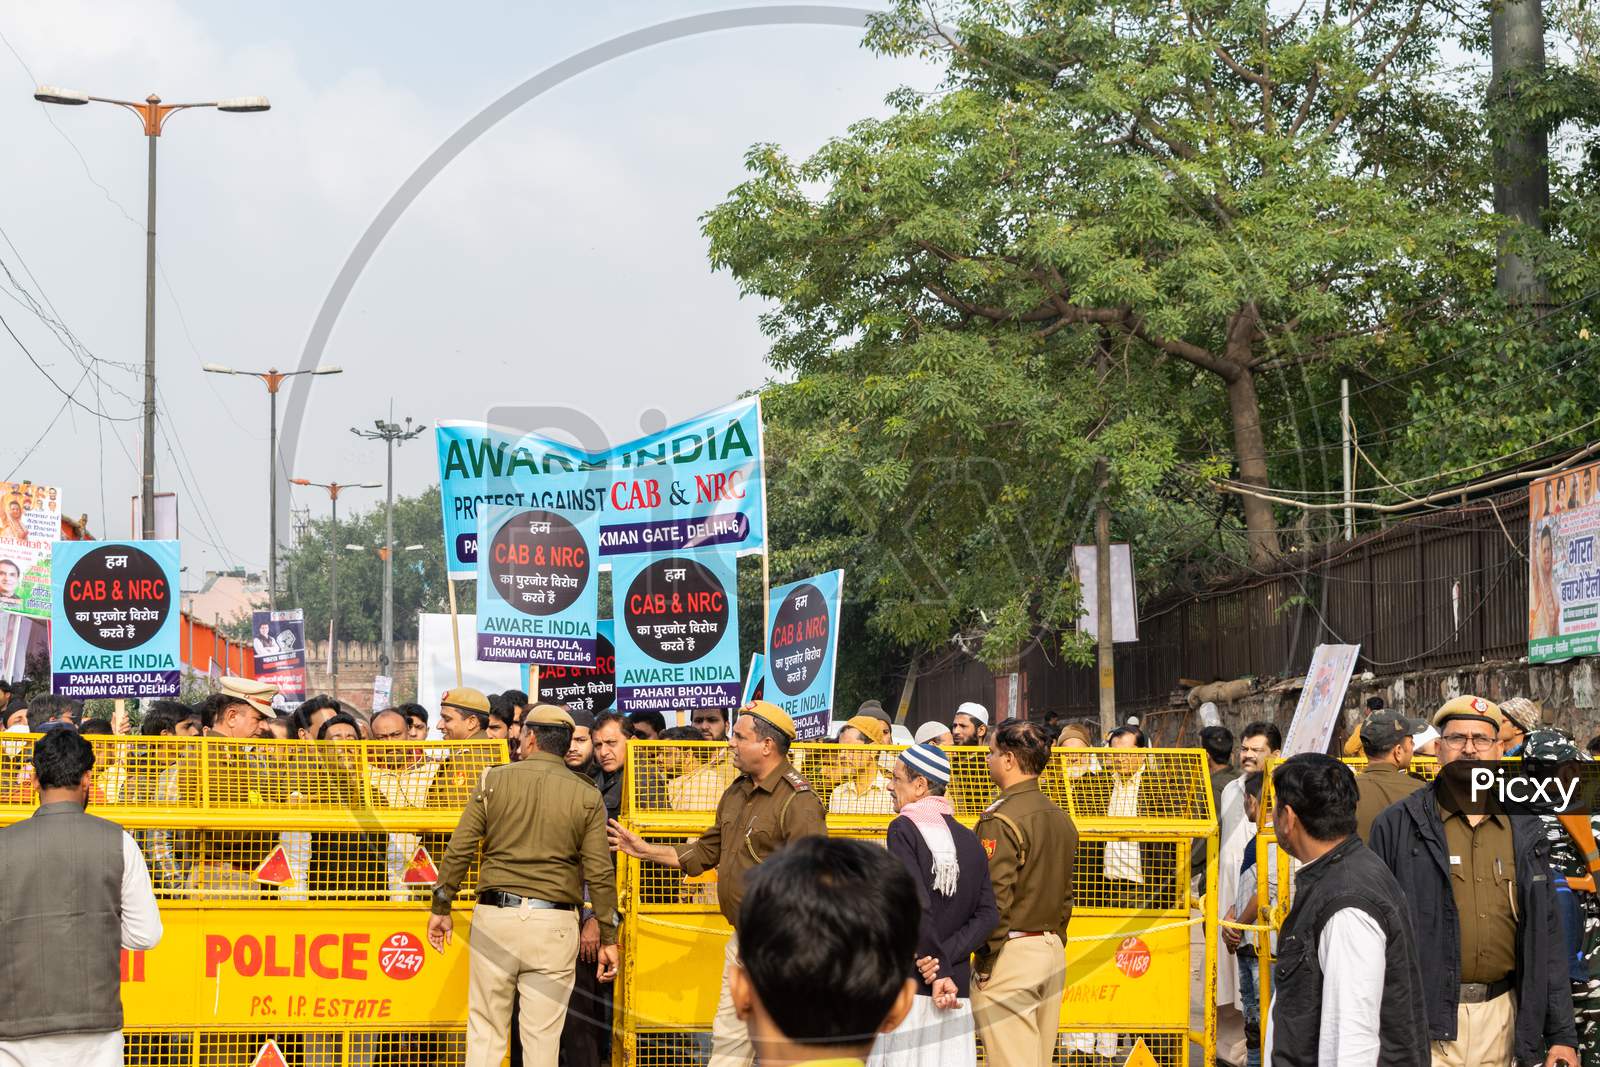 Delhi police and CRPF Jawans trying to stop People from protesting against CAB, Citizenship Amendment Bill and National Register of Citizens NRC